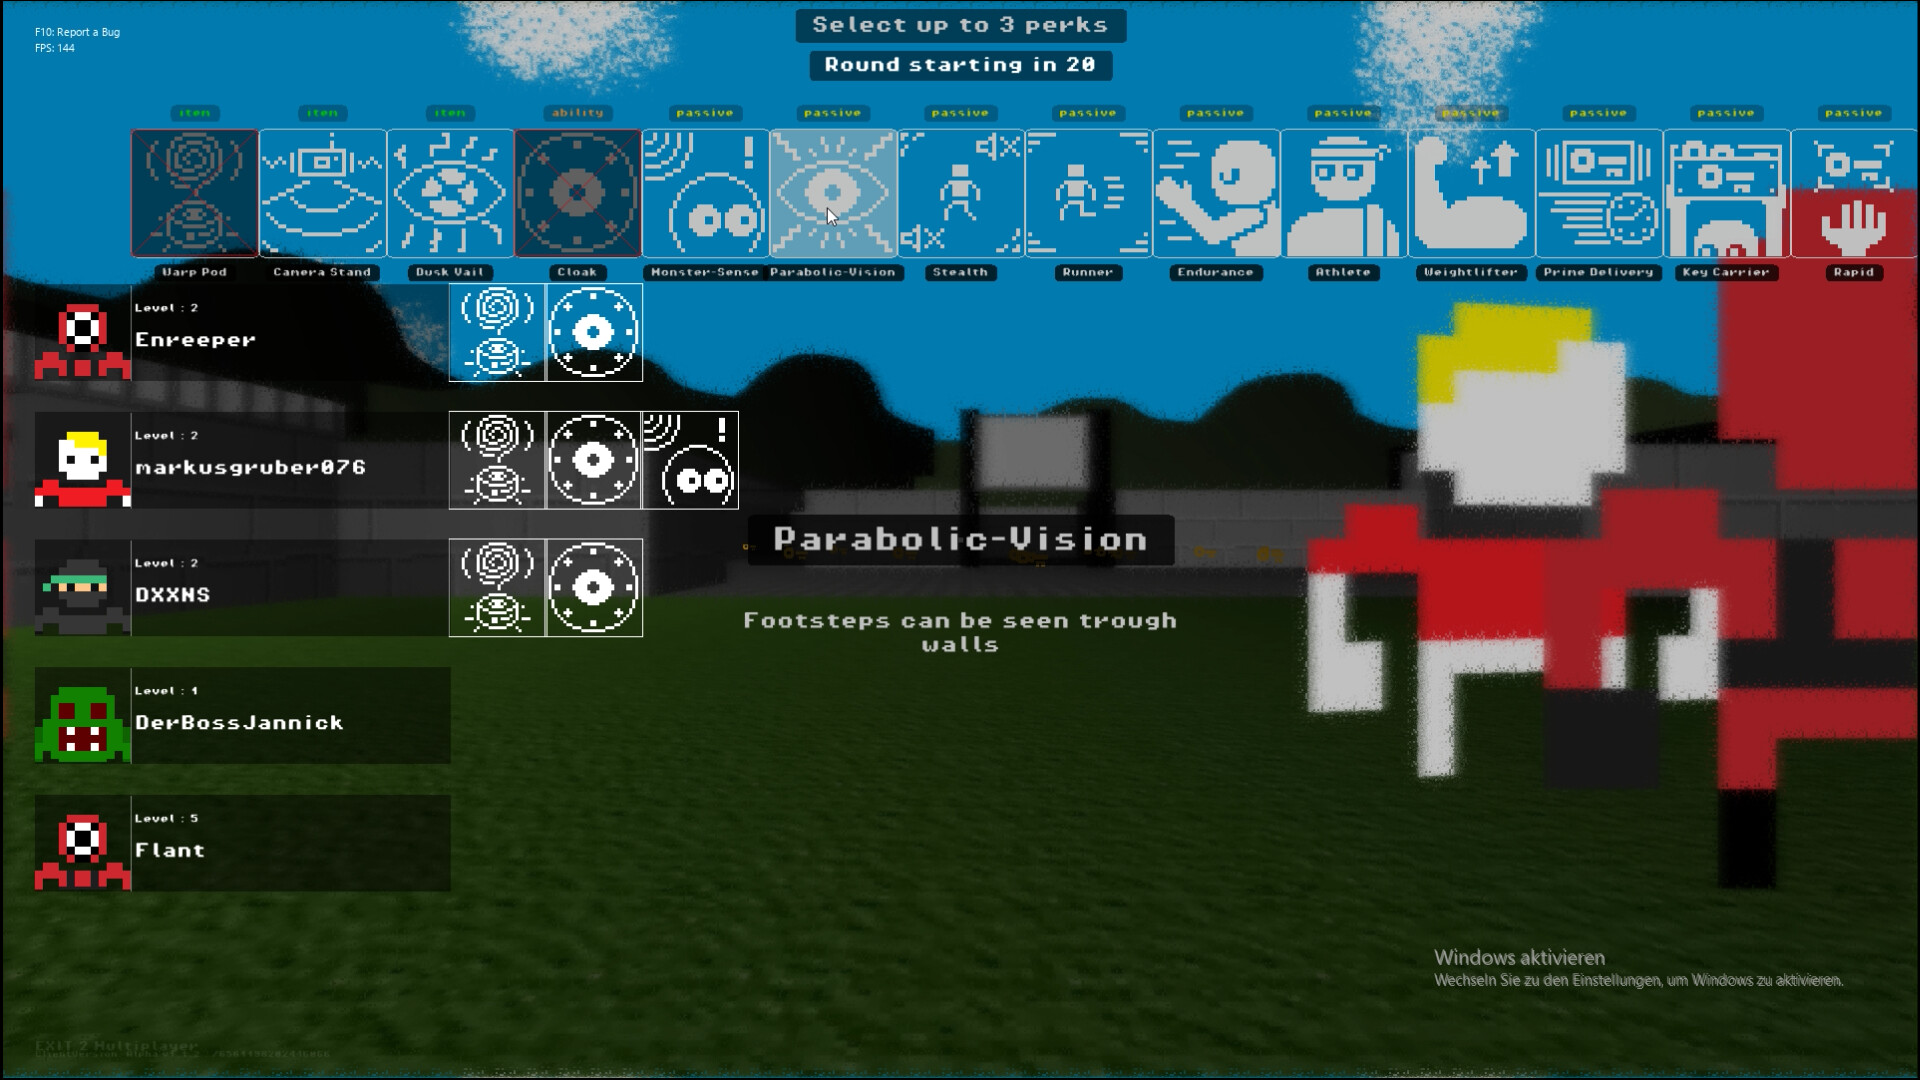 Minecraft Pvp client keystrokes for roblox bedwars